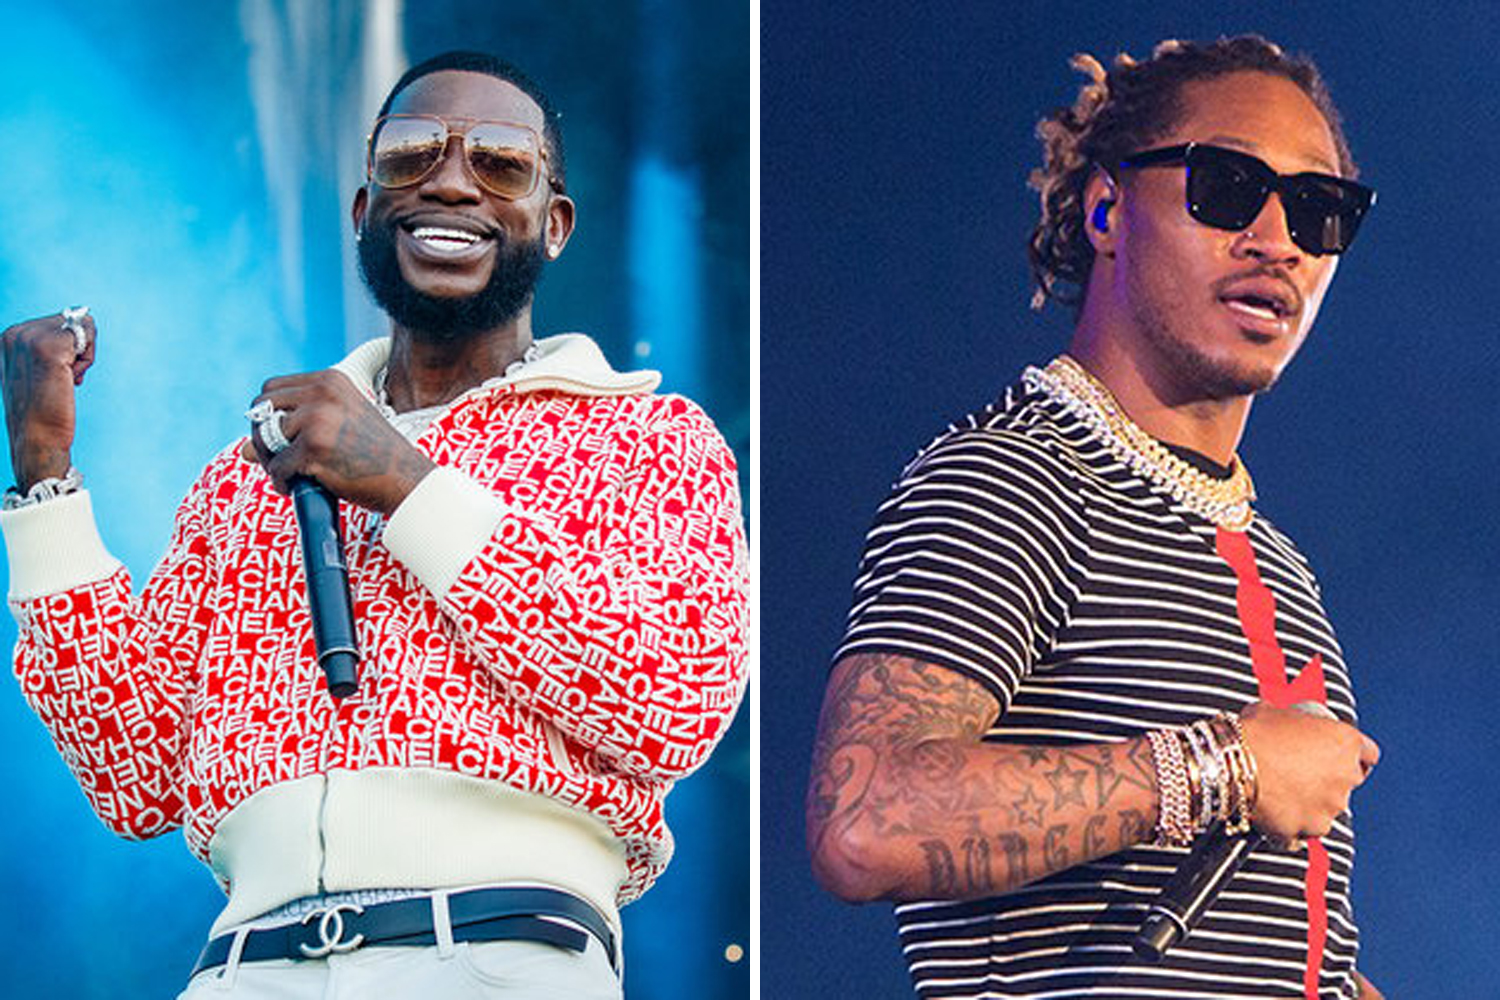 Hip-hop stars Future and Gucci Mane added to Yasalam line for Abu Dhabi Grand Prix | Time Out Abu Dhabi